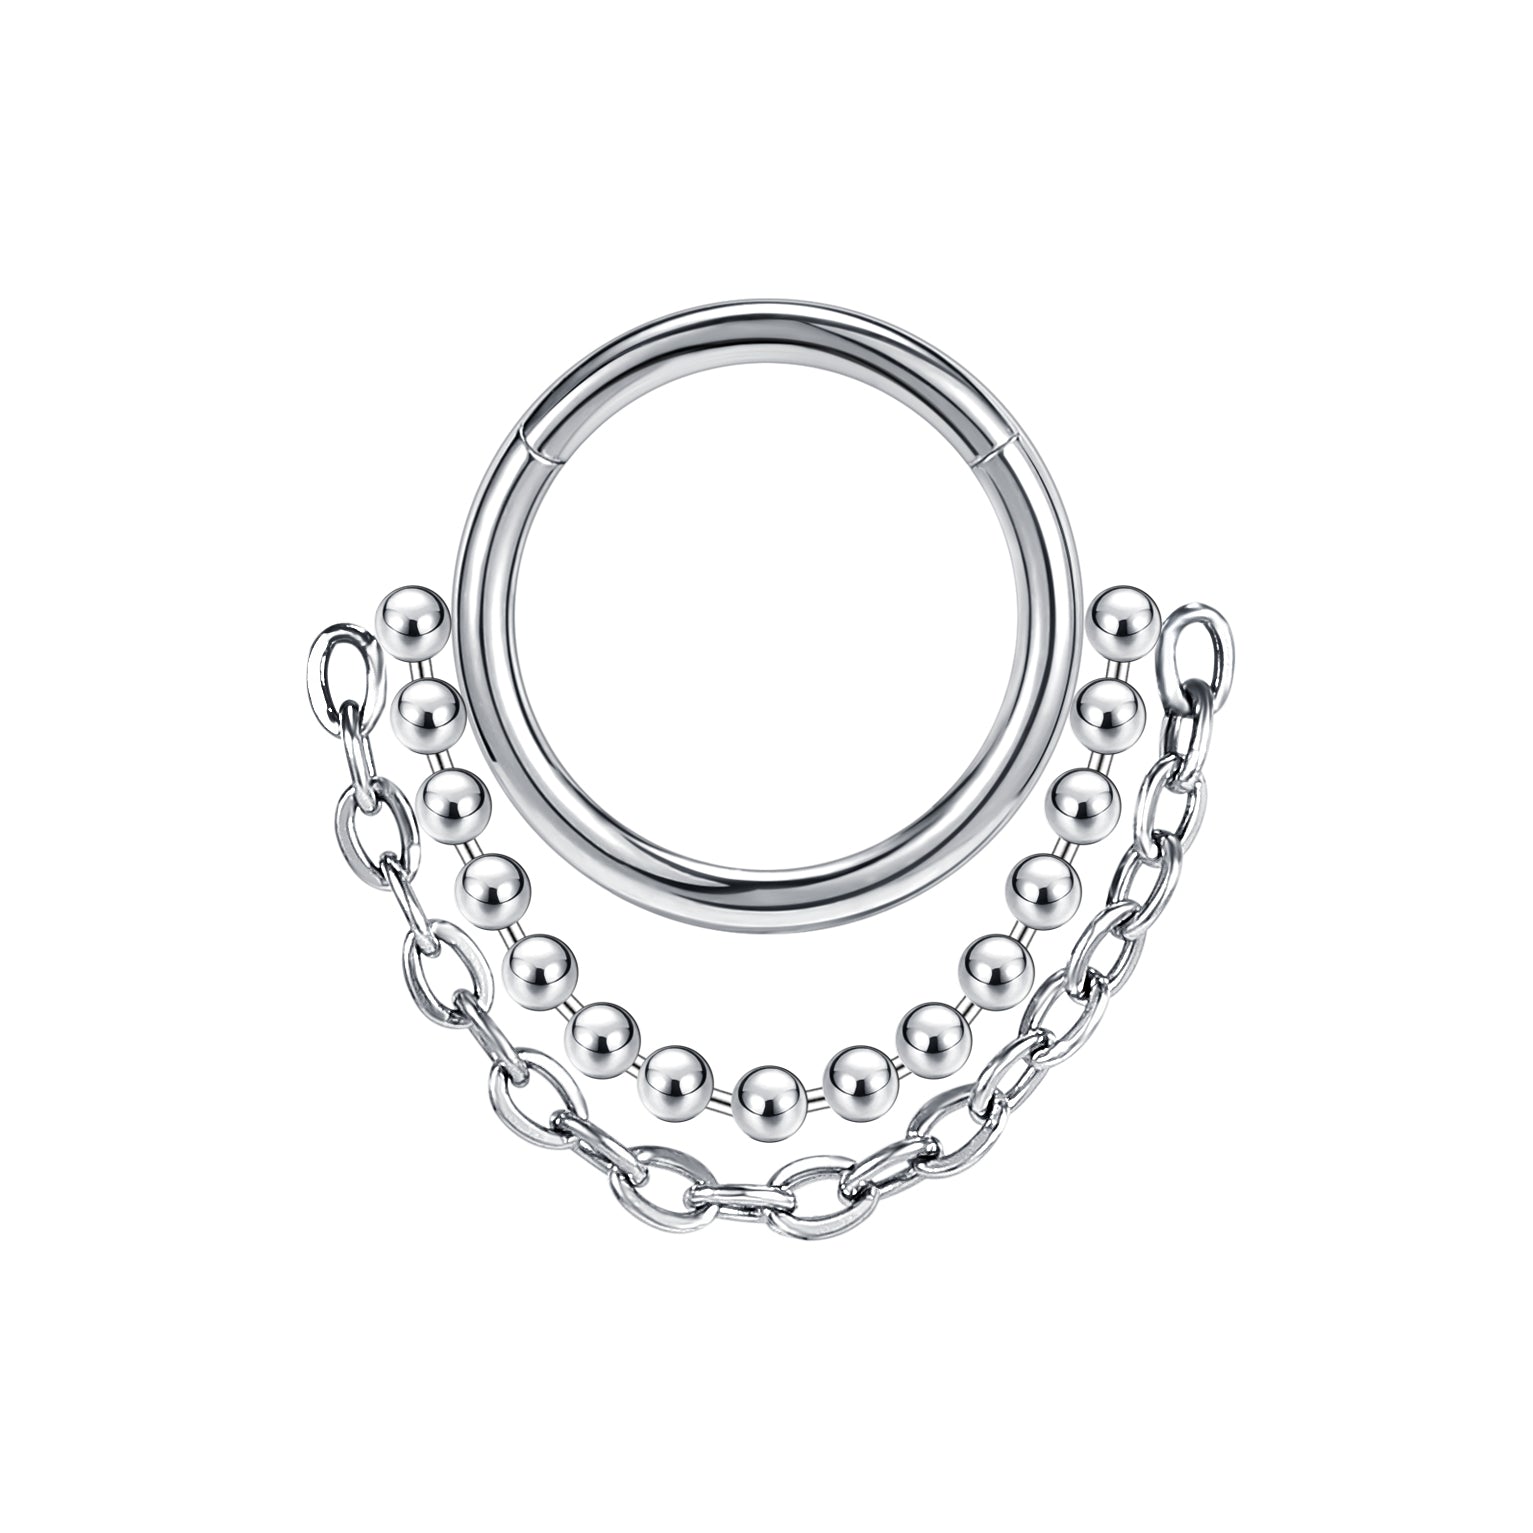 16g-nose-chain-septum-clicker-ring-cartilage-helix-piercing